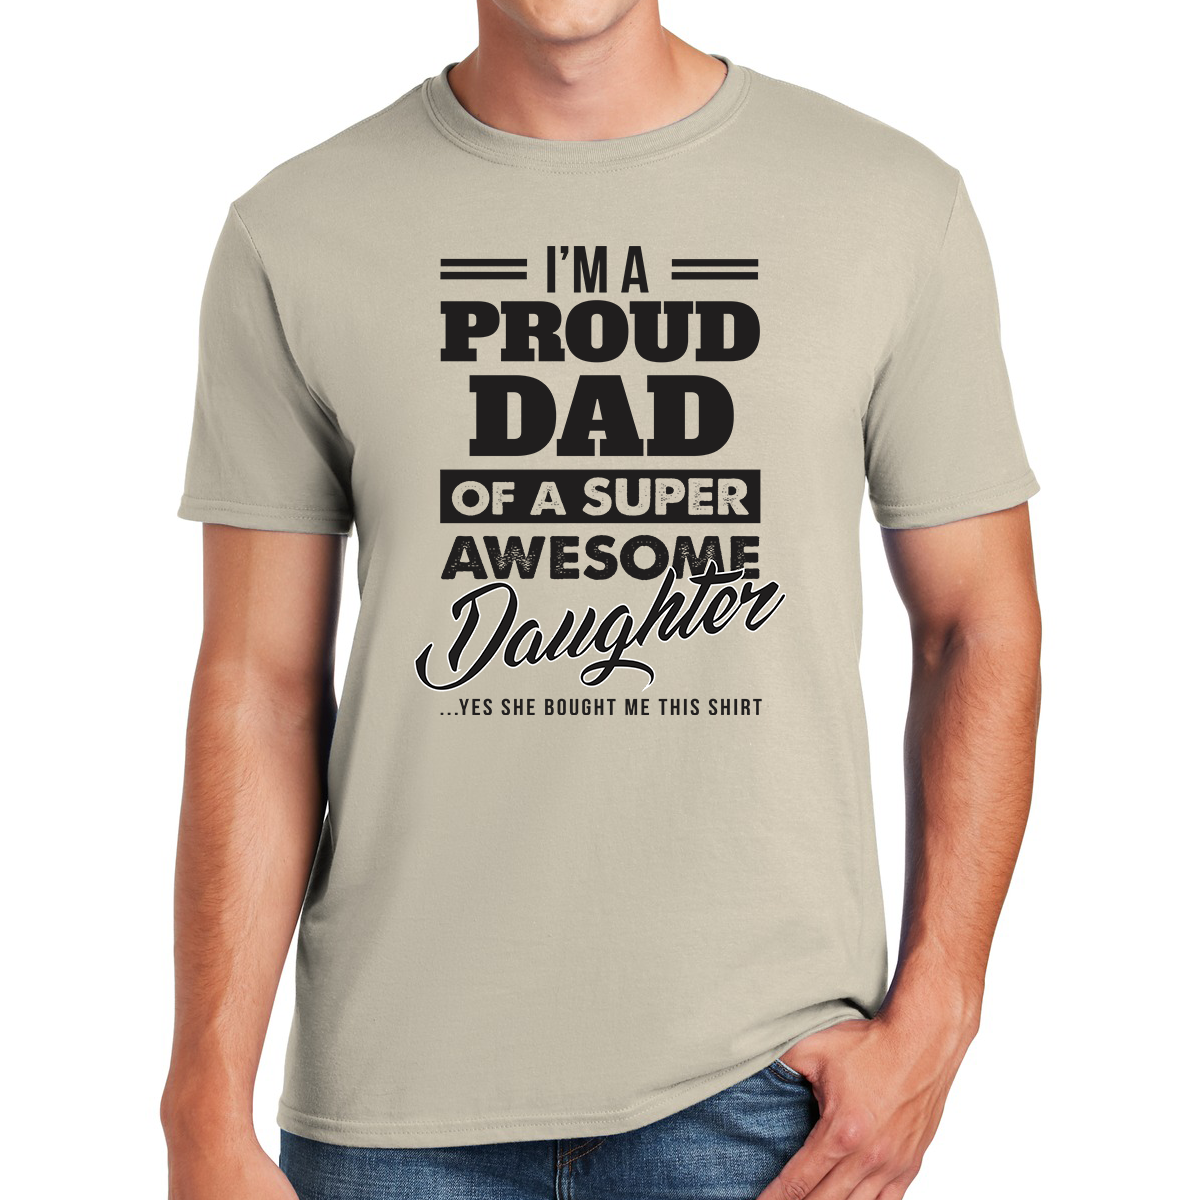 I'm A Proud Dad Of A Super Awesome Daughter Yes She Bought Me This Shirt Gift For Dads T-shirt